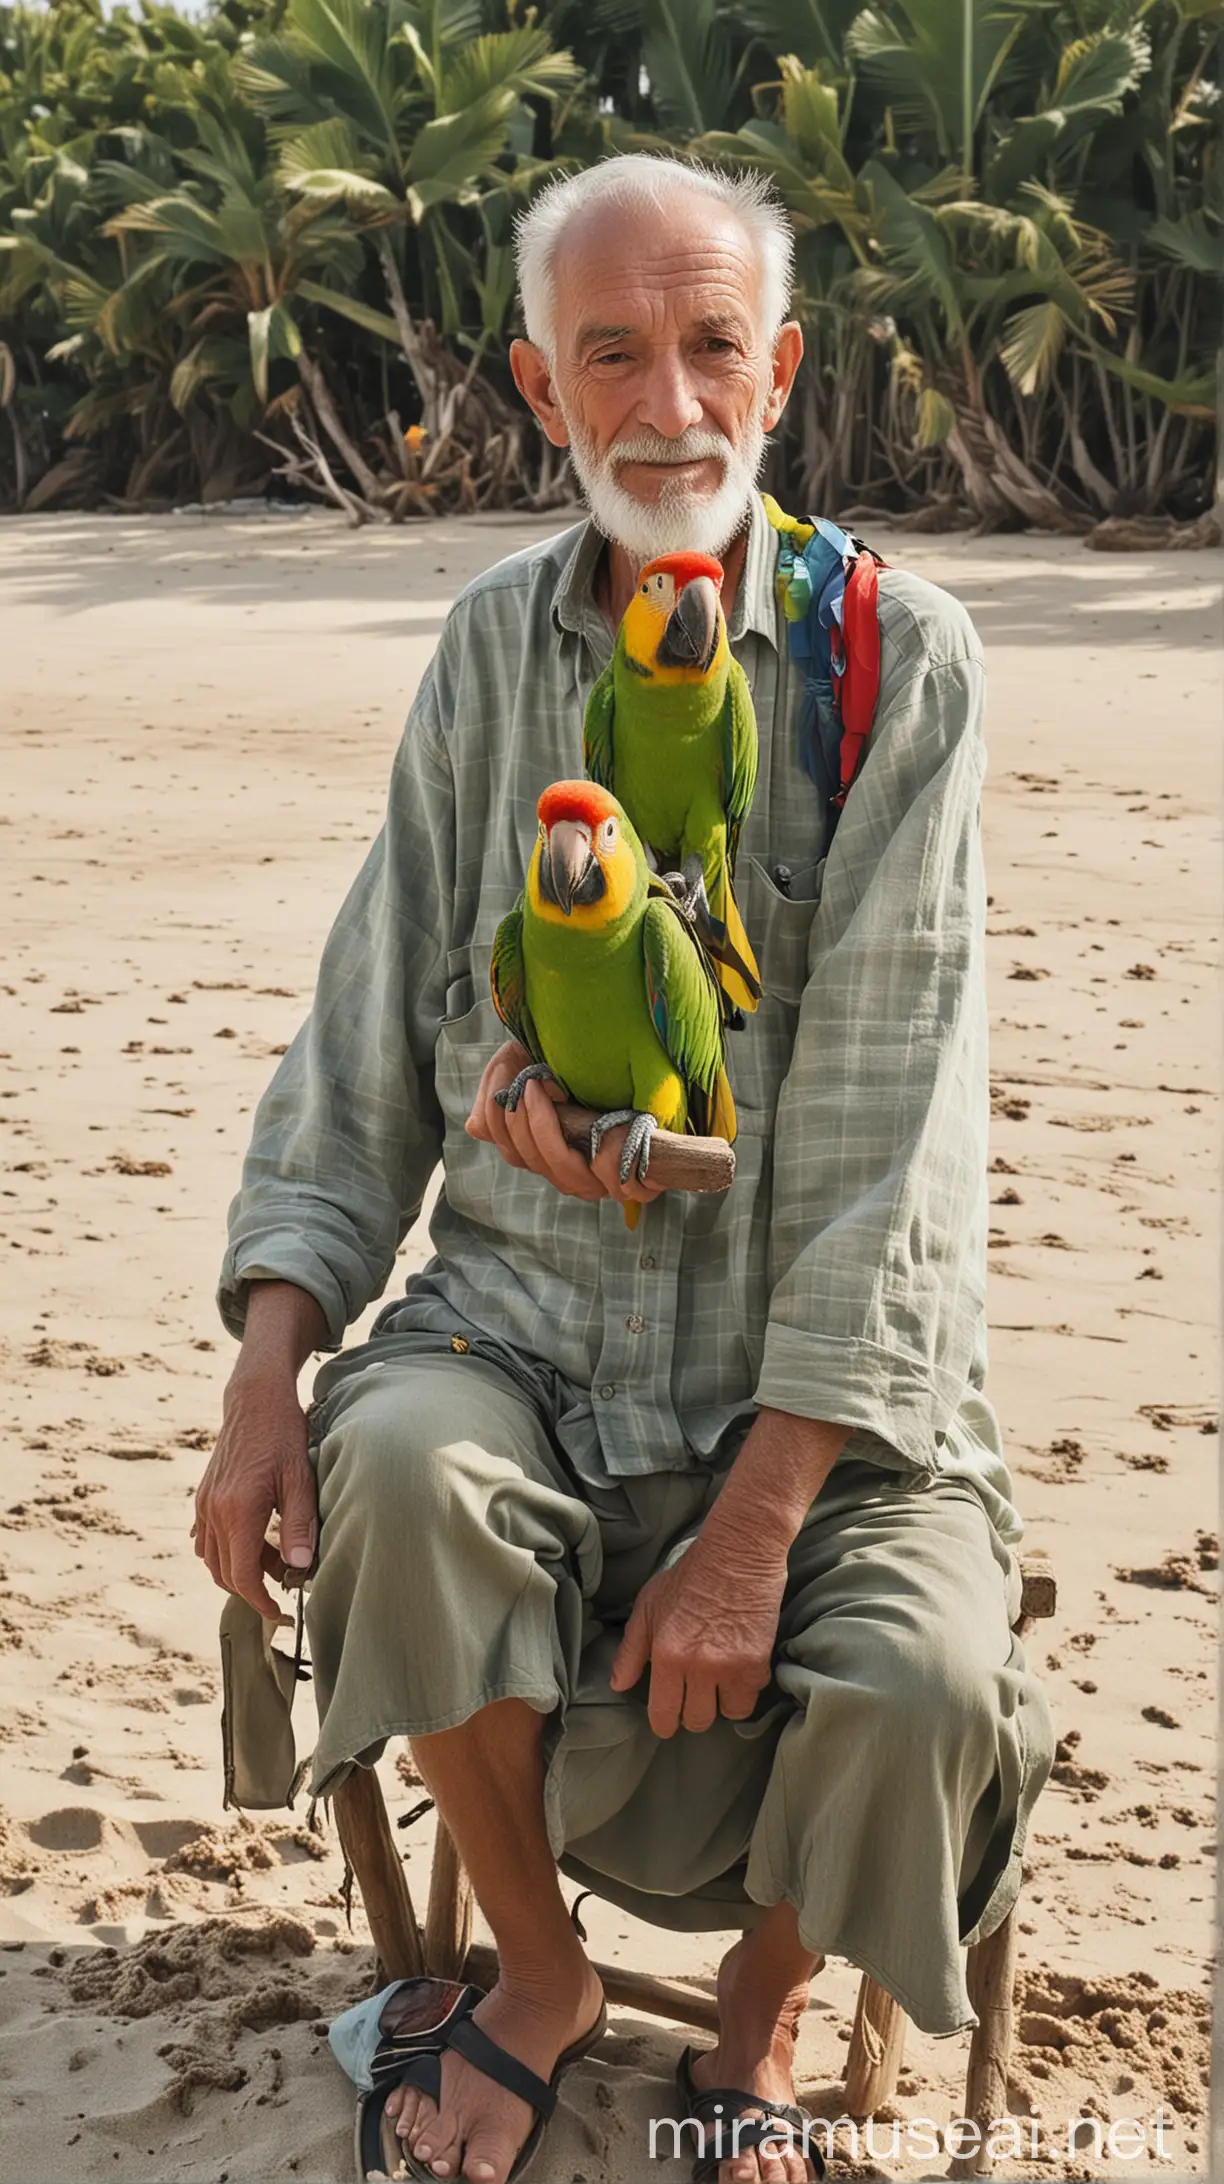 An old man sitting on beach some parrot on his shoulder